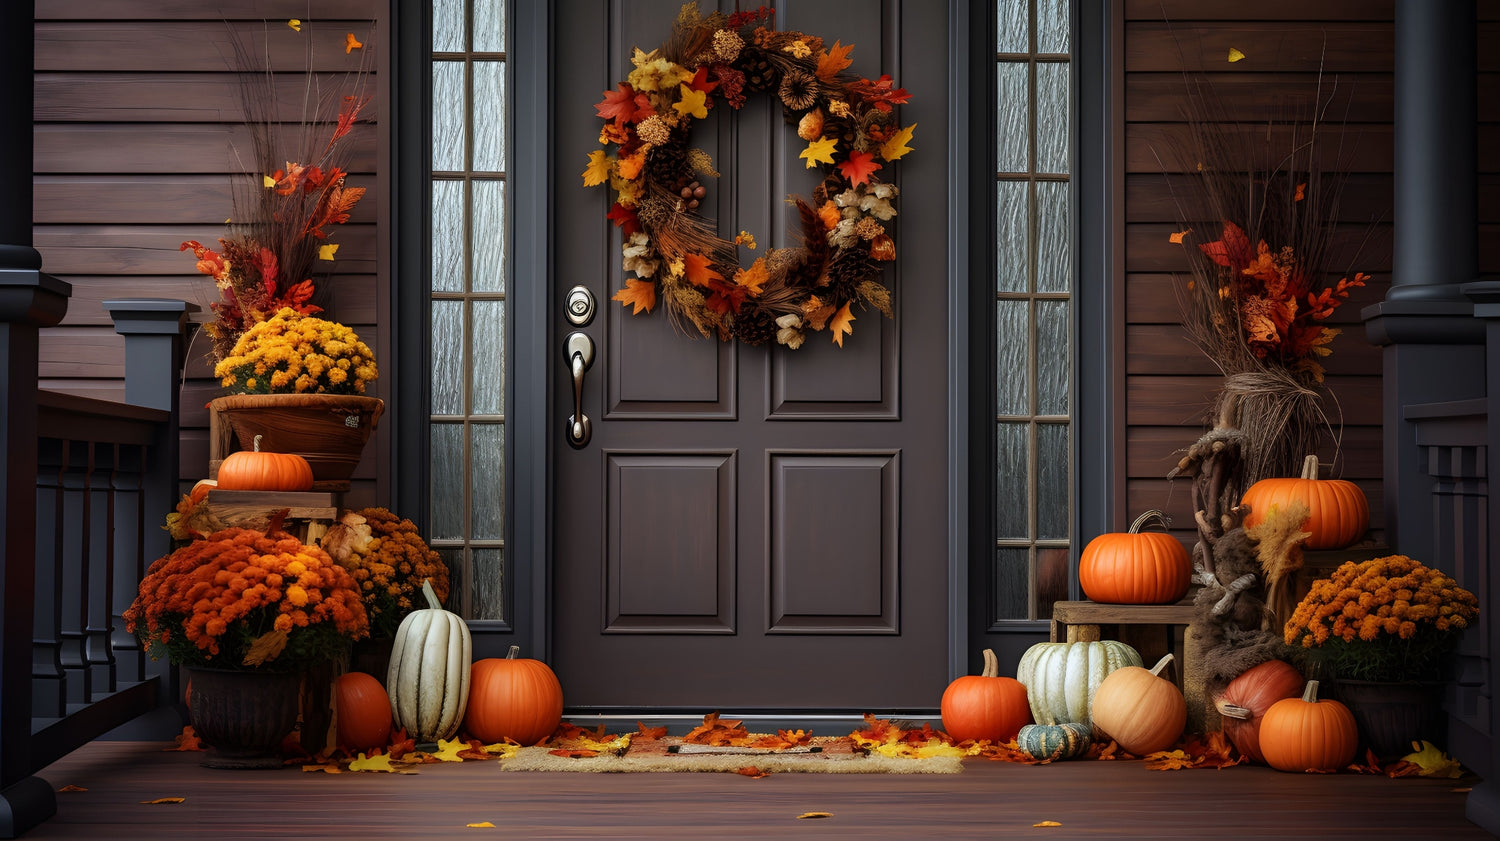 Bring autumn to your doorstep with our fall front porch ideas. | Afloral